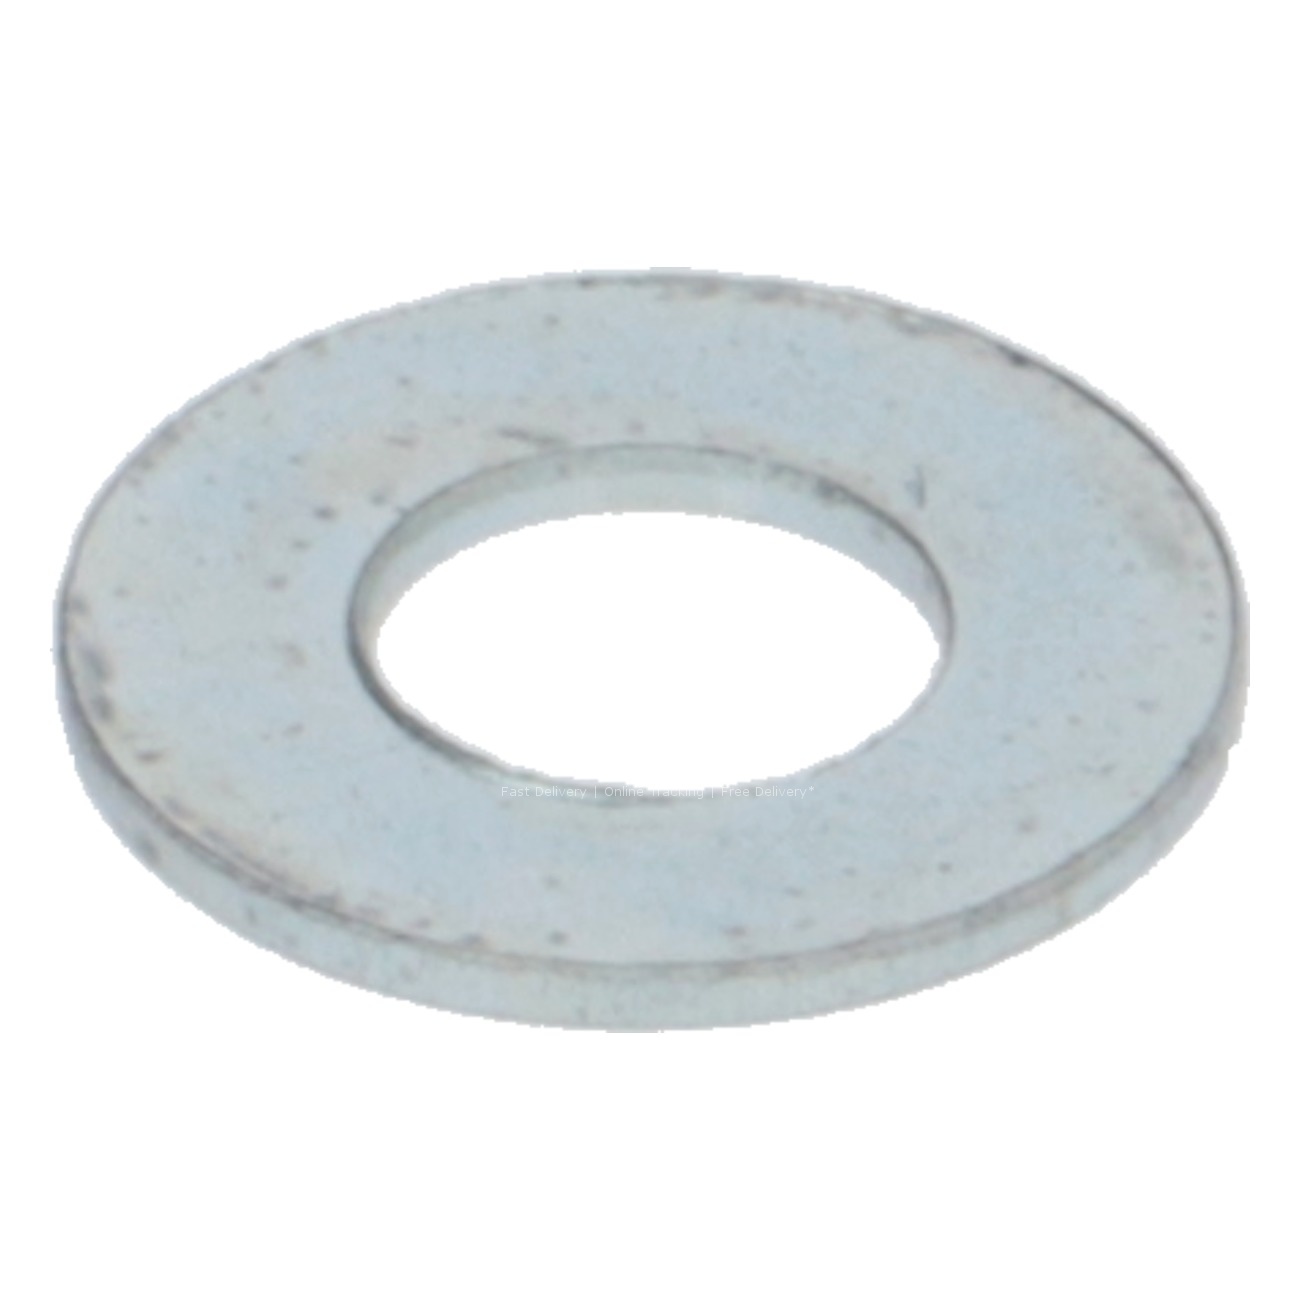 WASHER D.3 FLAT 6061.0021